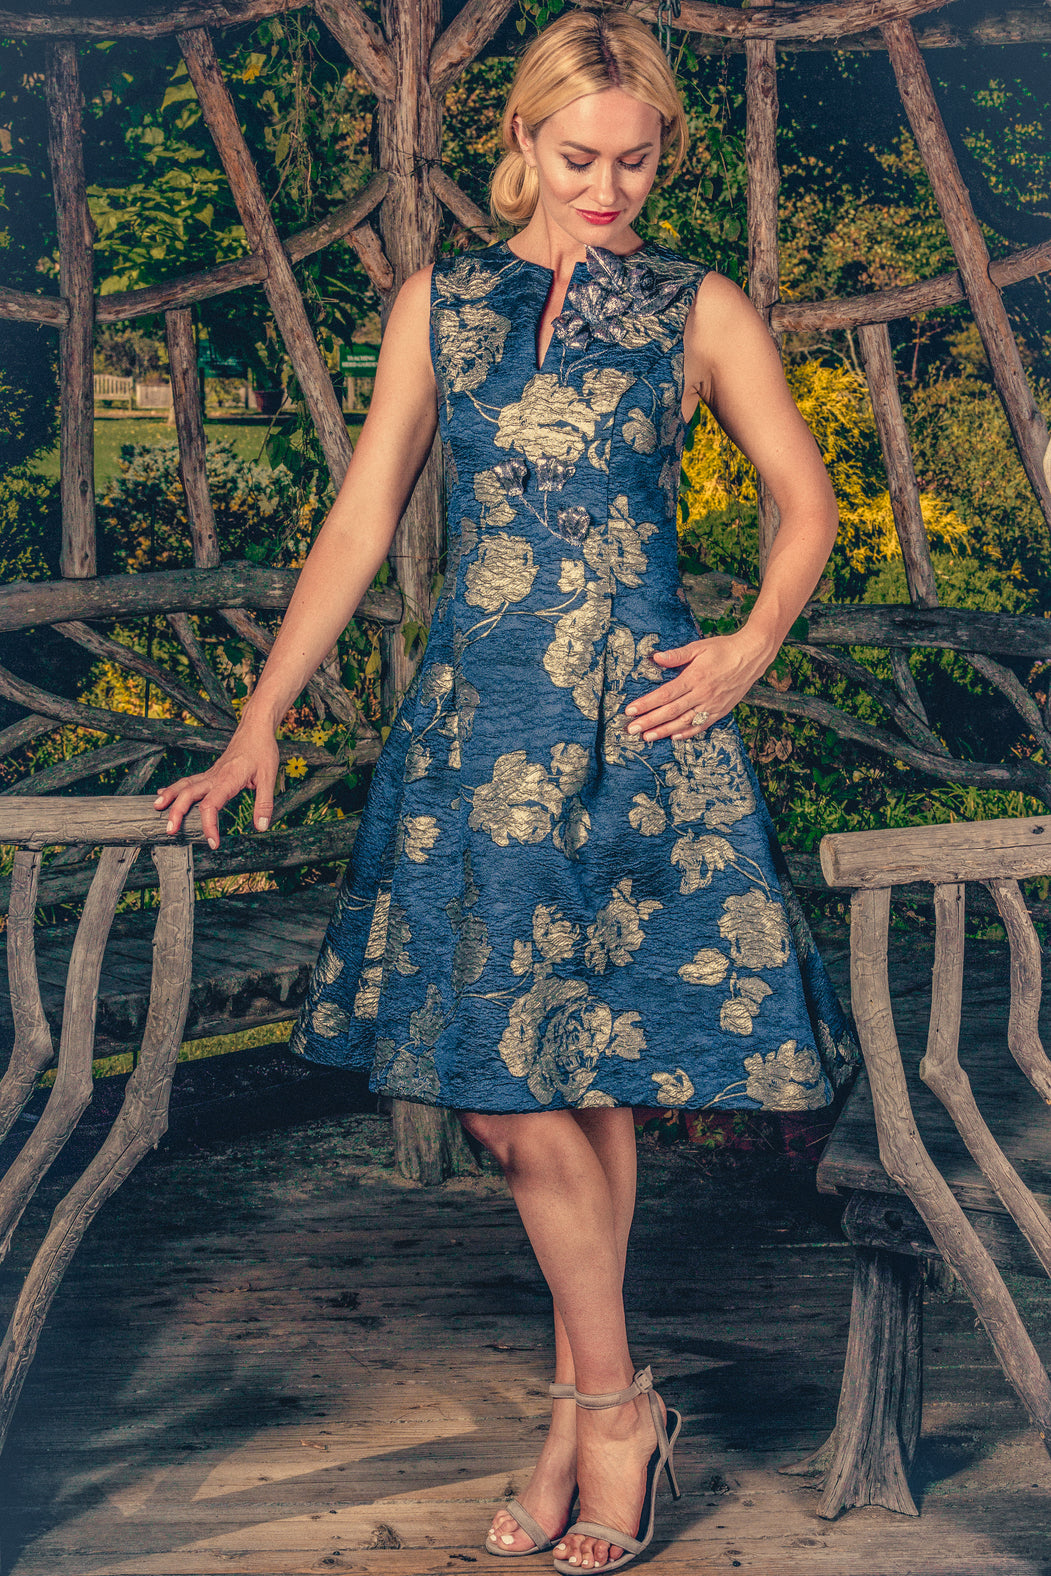 anna nieman designer dress Boston. A dress made from Swiss metallic brocade, with a fit-and-flare silhouette, has the comfort of weightless fabric with three-dimensional silvery / navy pattern.